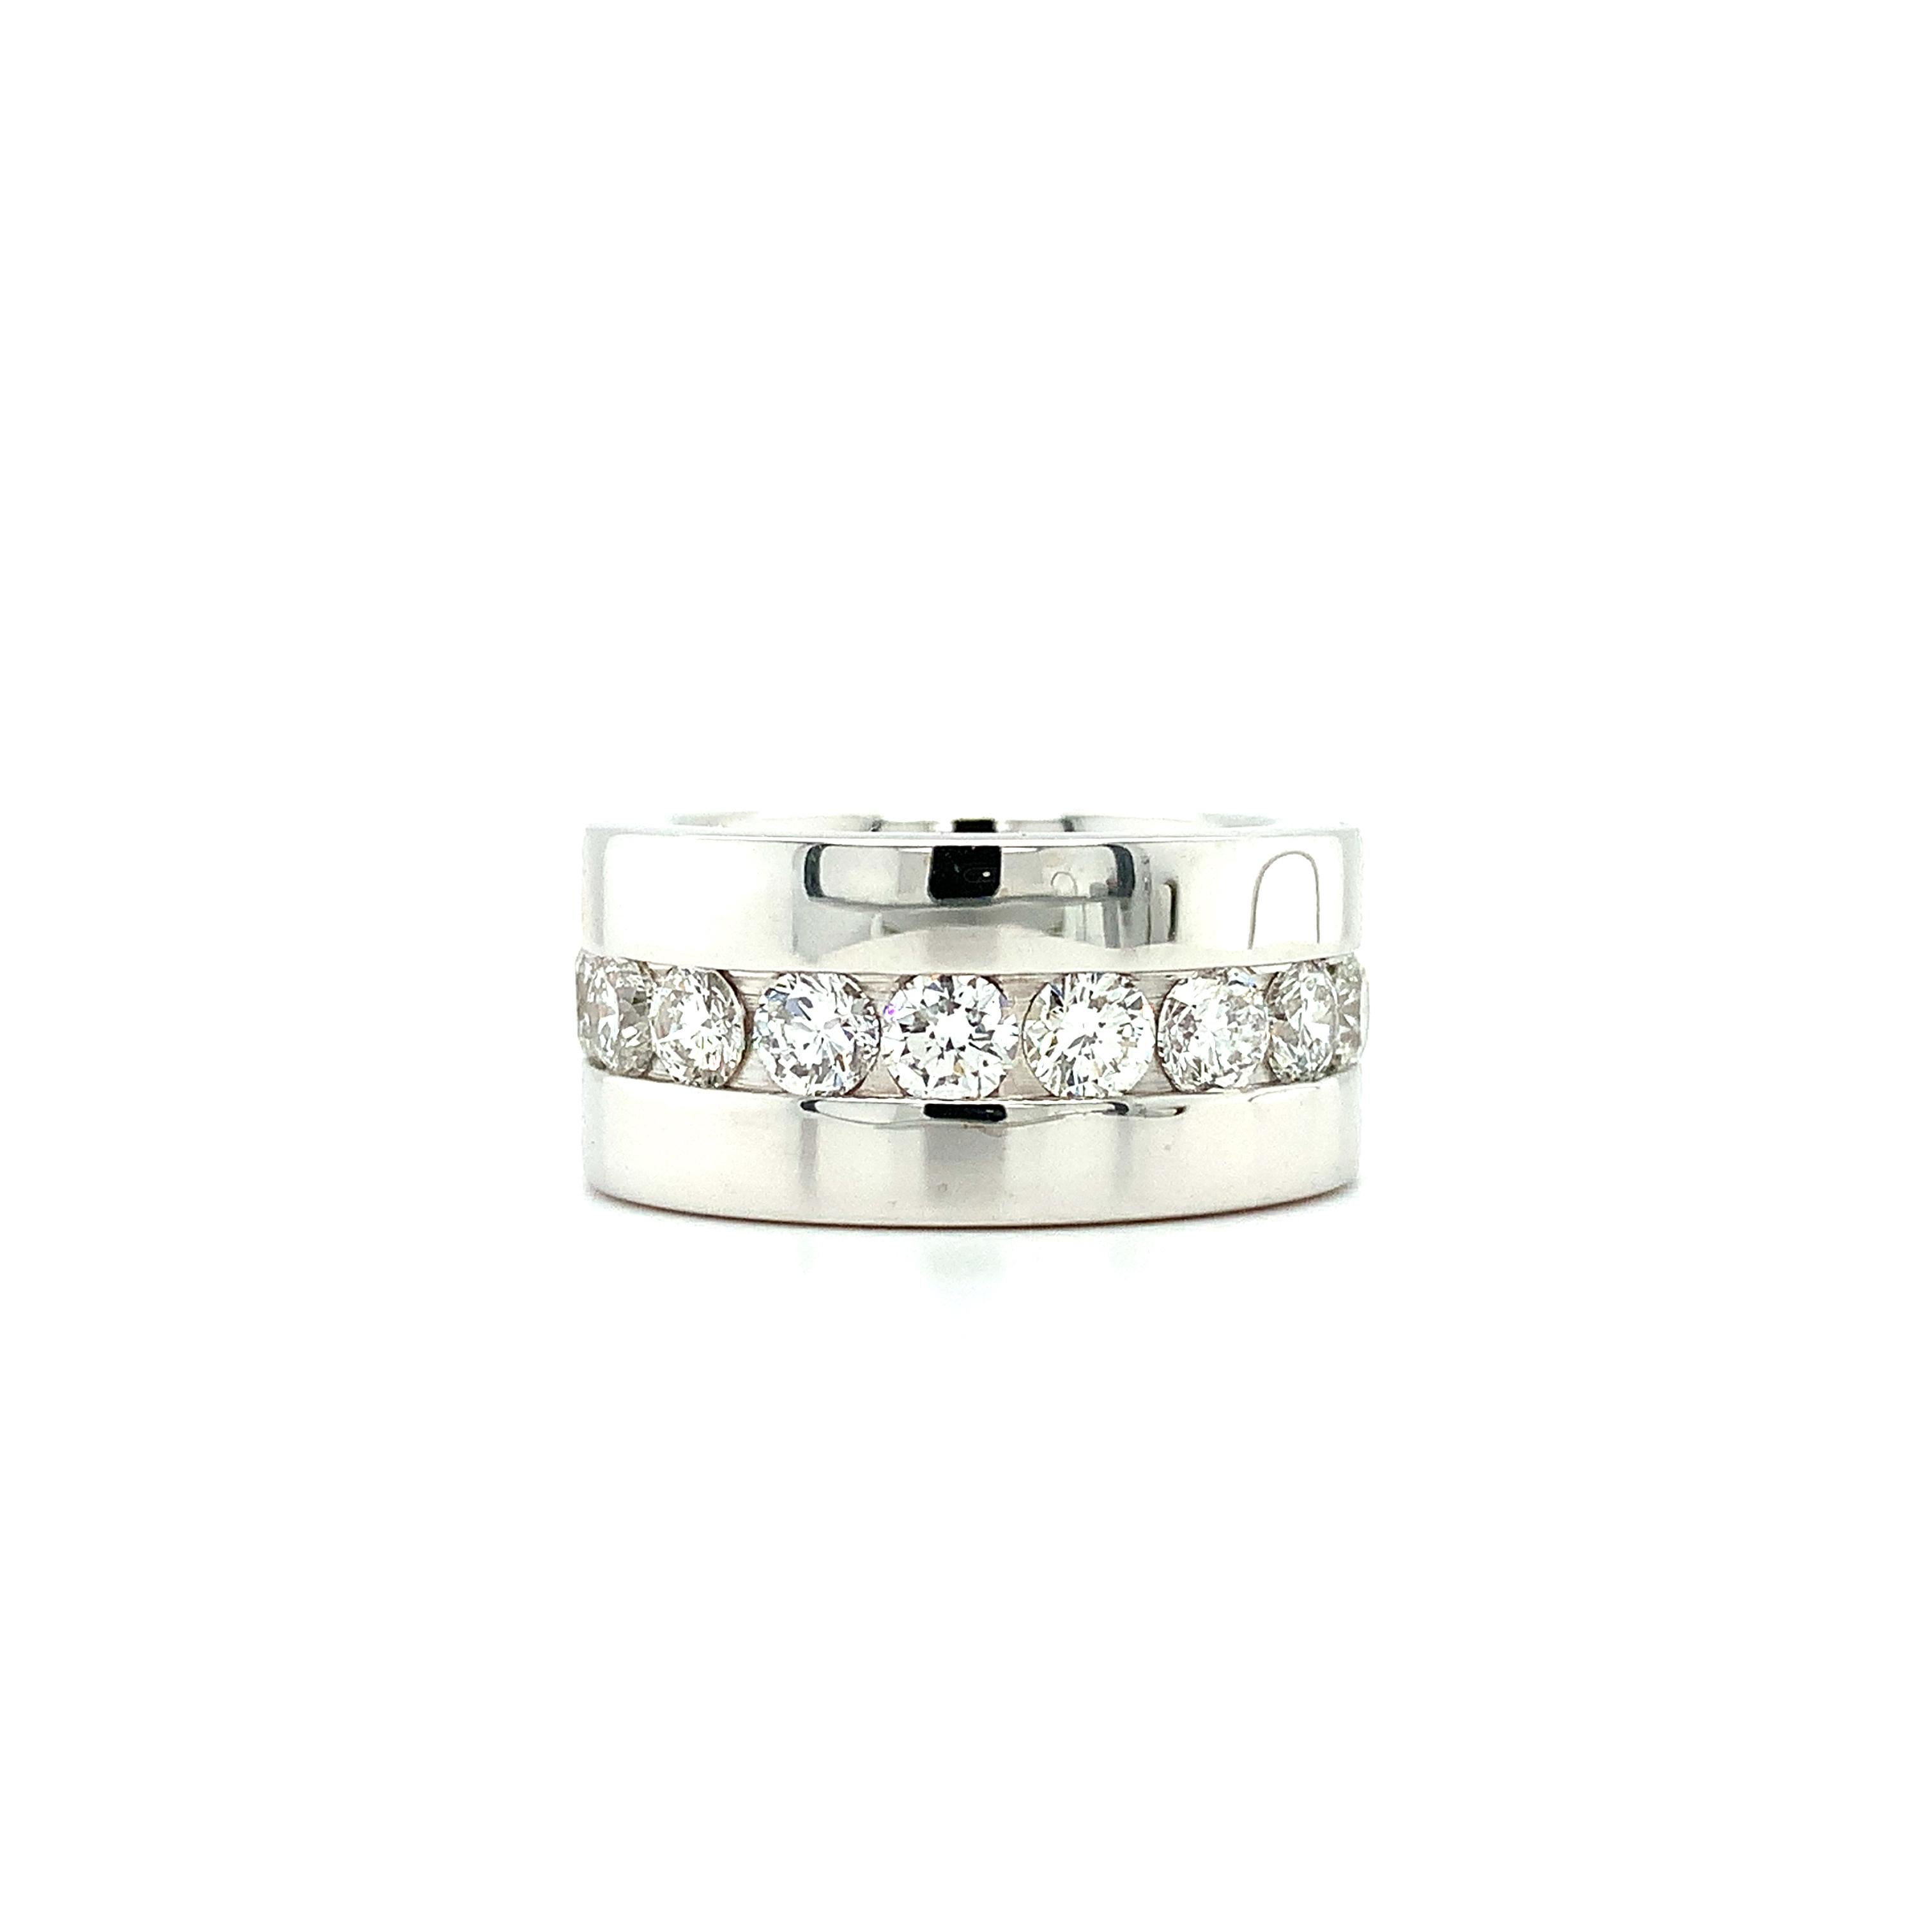 Large and wide full eternity diamond ring in 18ct white gold.
Composed of round brilliant cut diamonds all way around the band securely set full eternity large wedding band mounted in 18ct white gold.
Round brilliant diamonds total weighing 3.60ct F